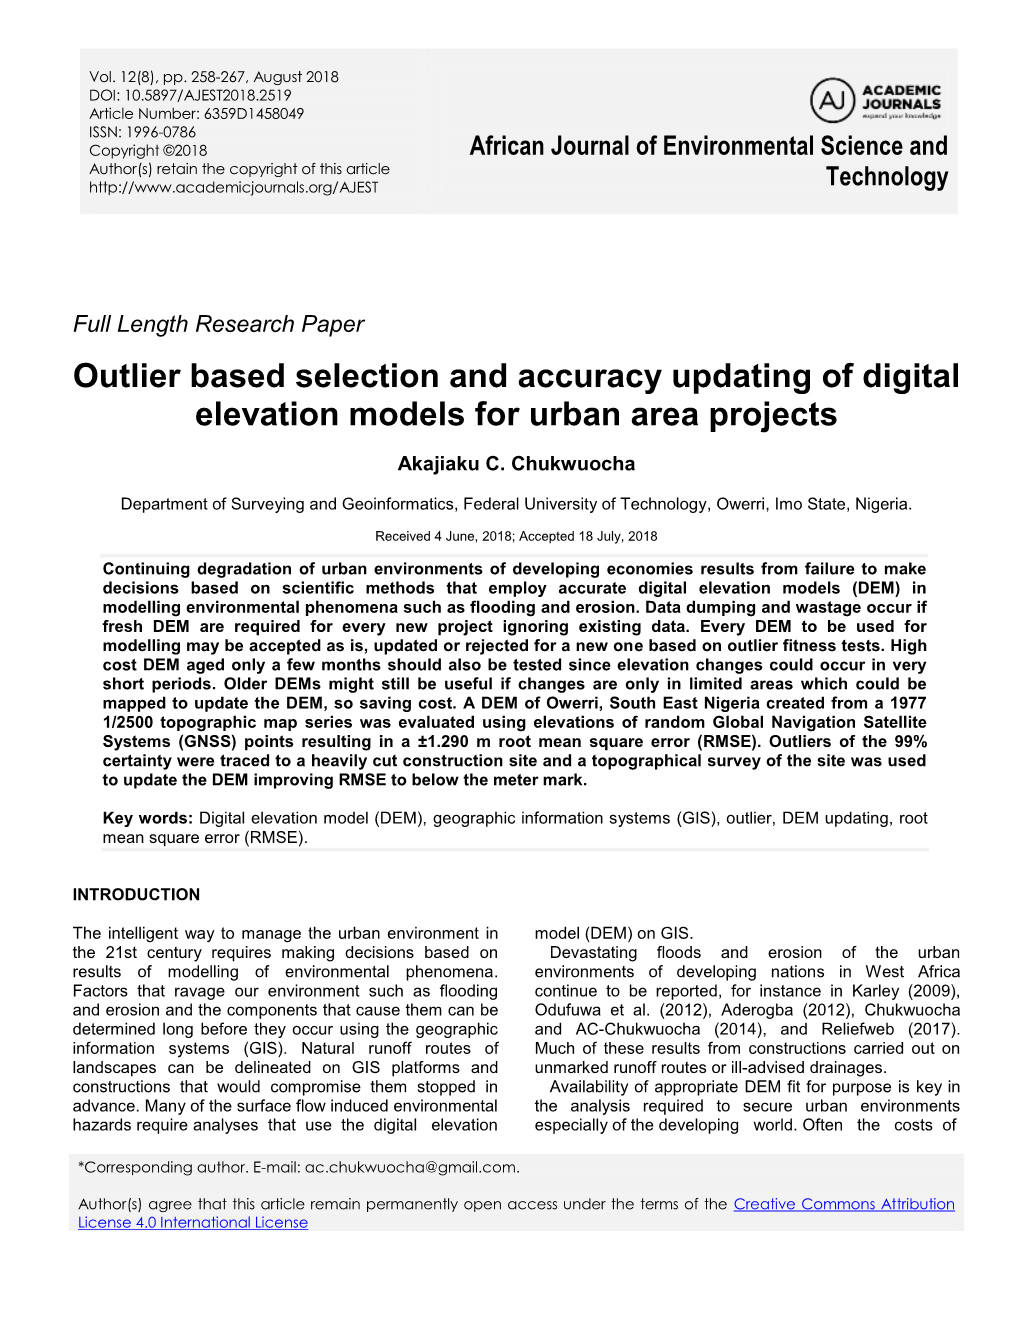 Outlier Based Selection and Accuracy Updating of Digital Elevation Models for Urban Area Projects